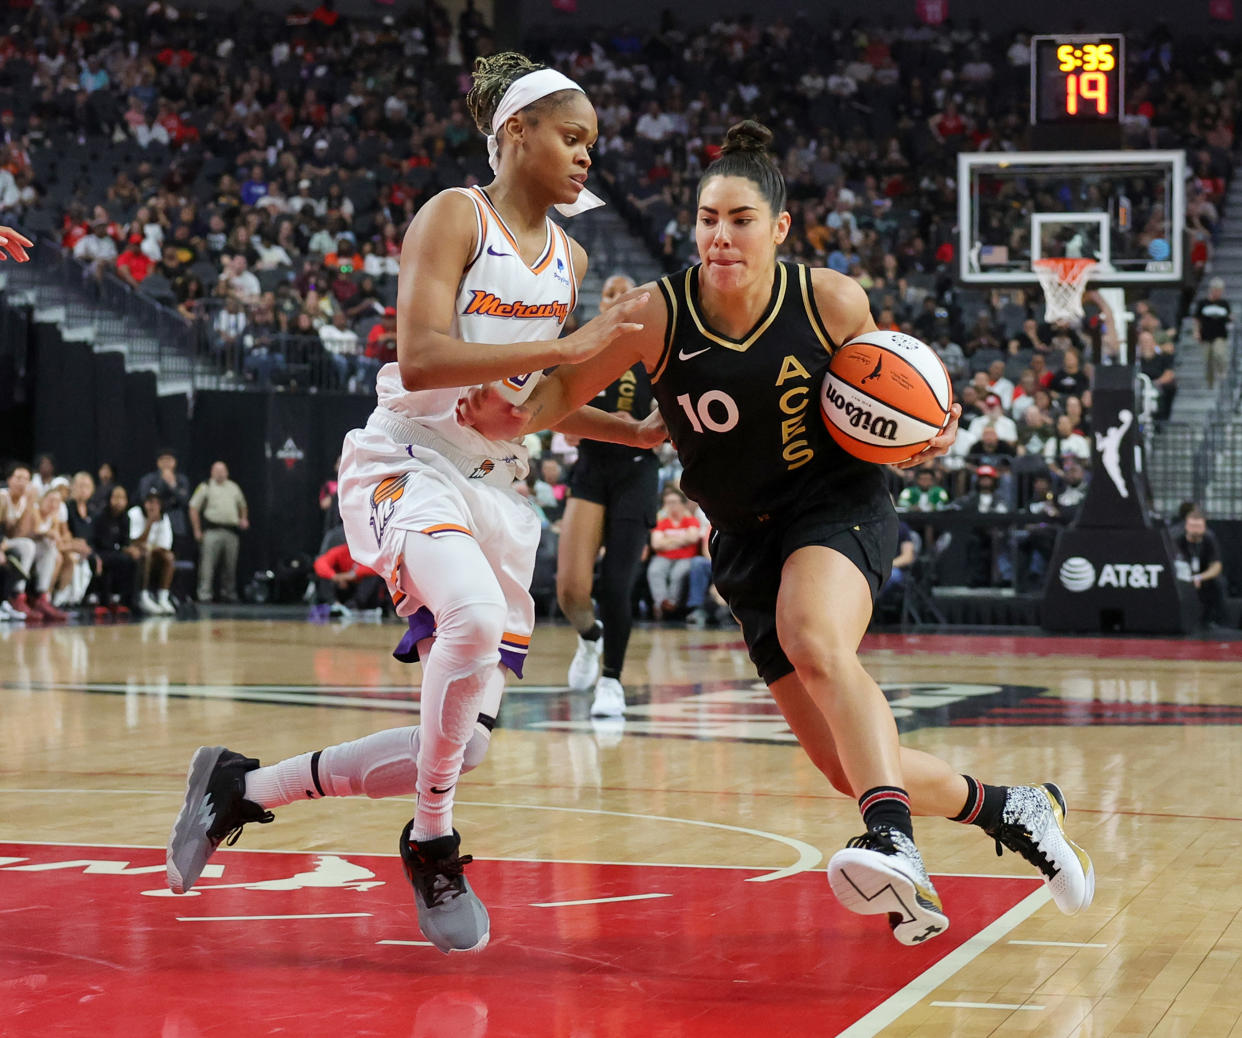 Las Vegas Aces guard Kelsey Plum drives against Phoenix Mercury guard Moriah Jefferson during their game on Sept. 10, 2023 in Las Vegas. (Photo by Ethan Miller/Getty Images)